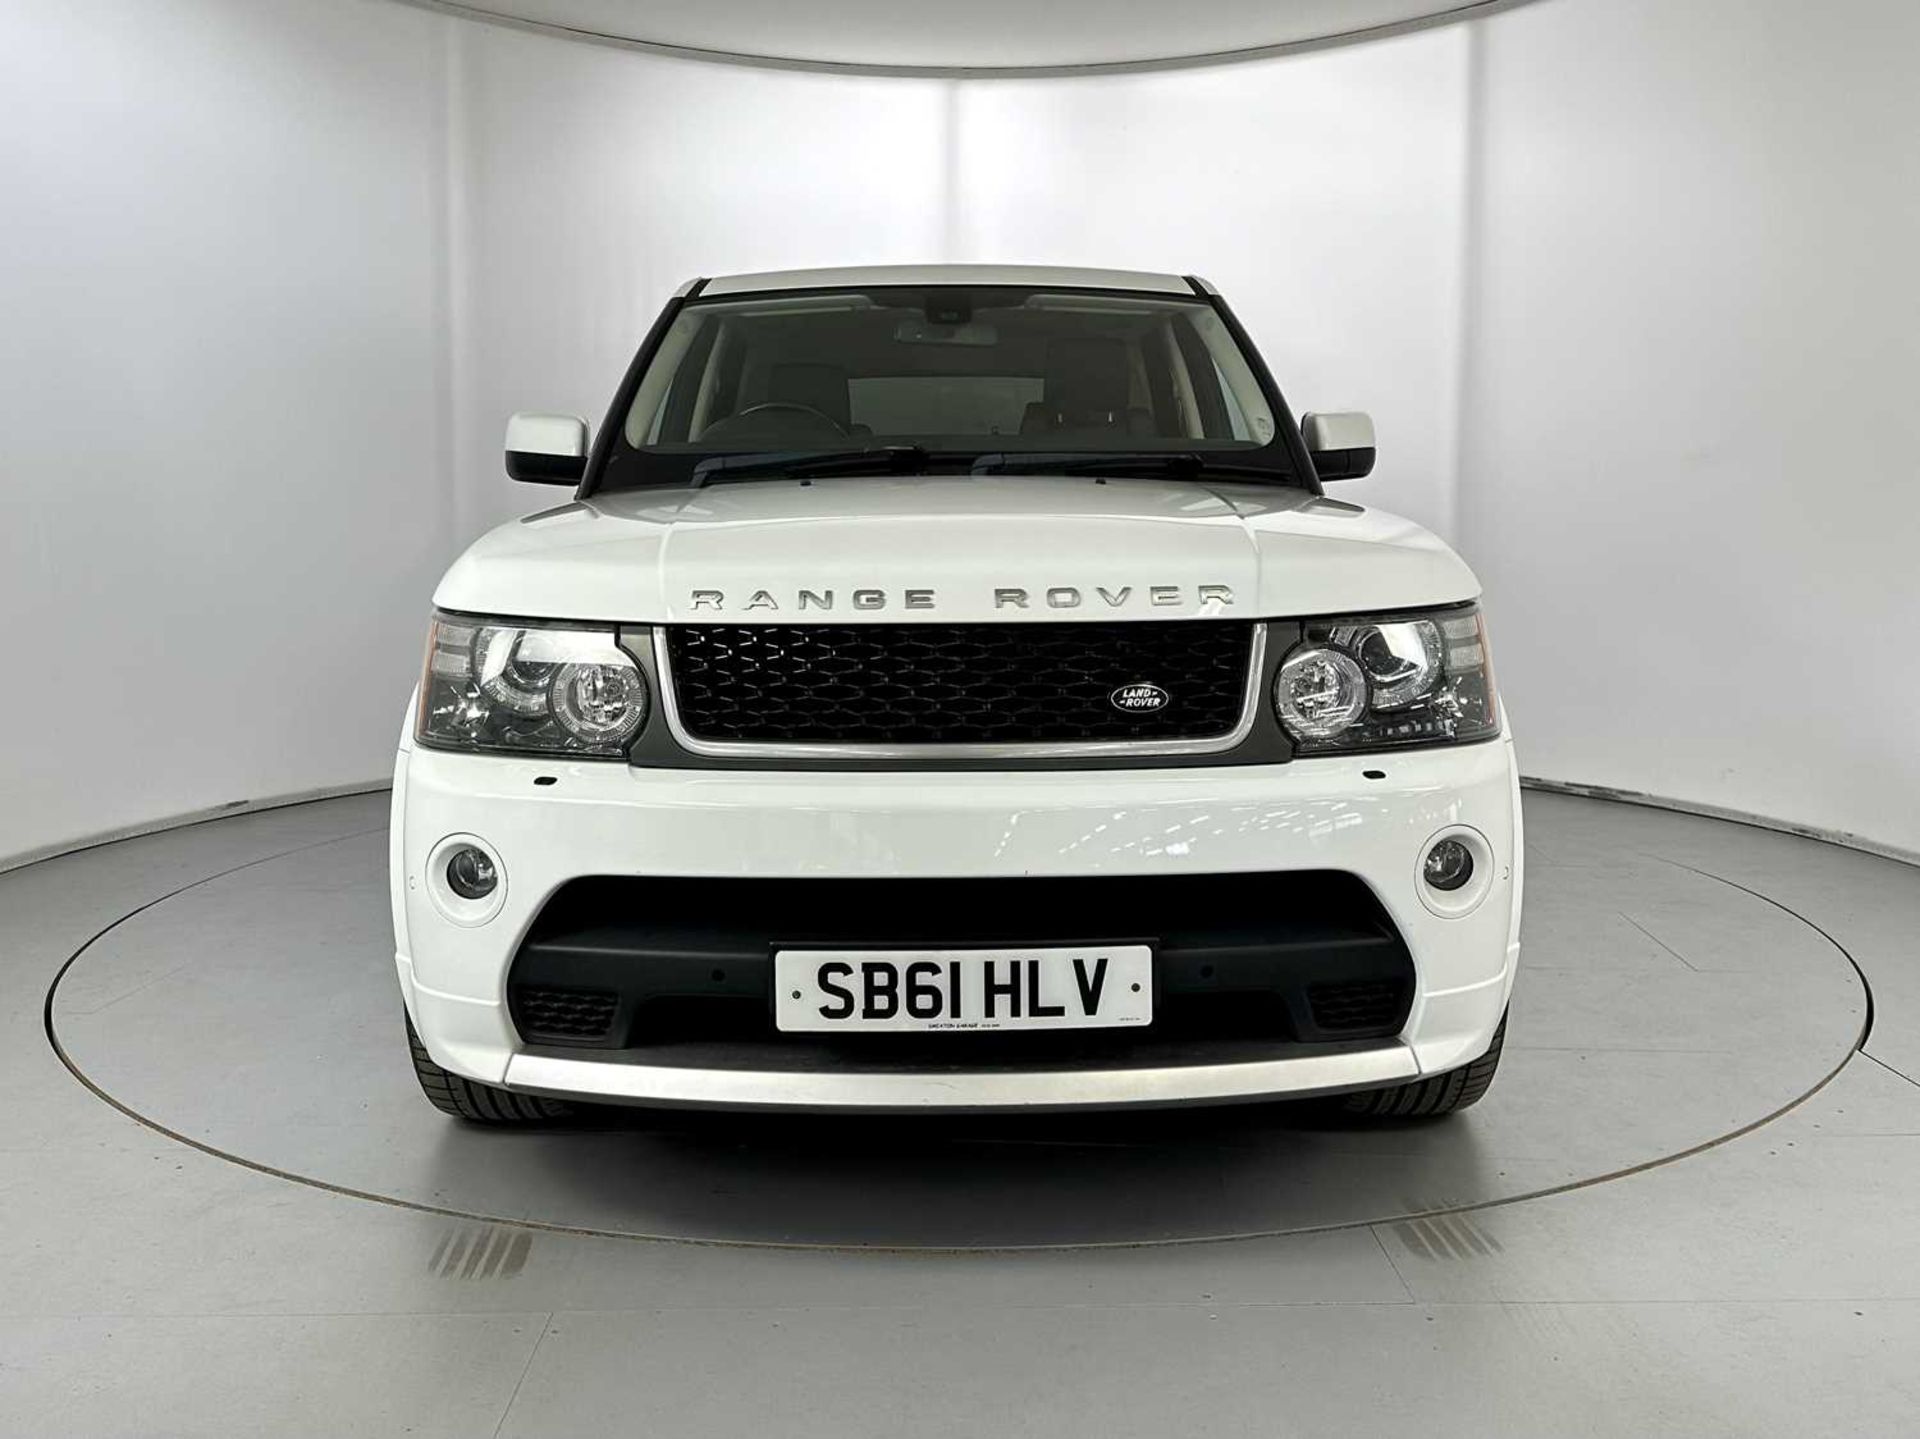 2011 Land Rover Range Rover Sport Stormer Edition  - Image 2 of 33